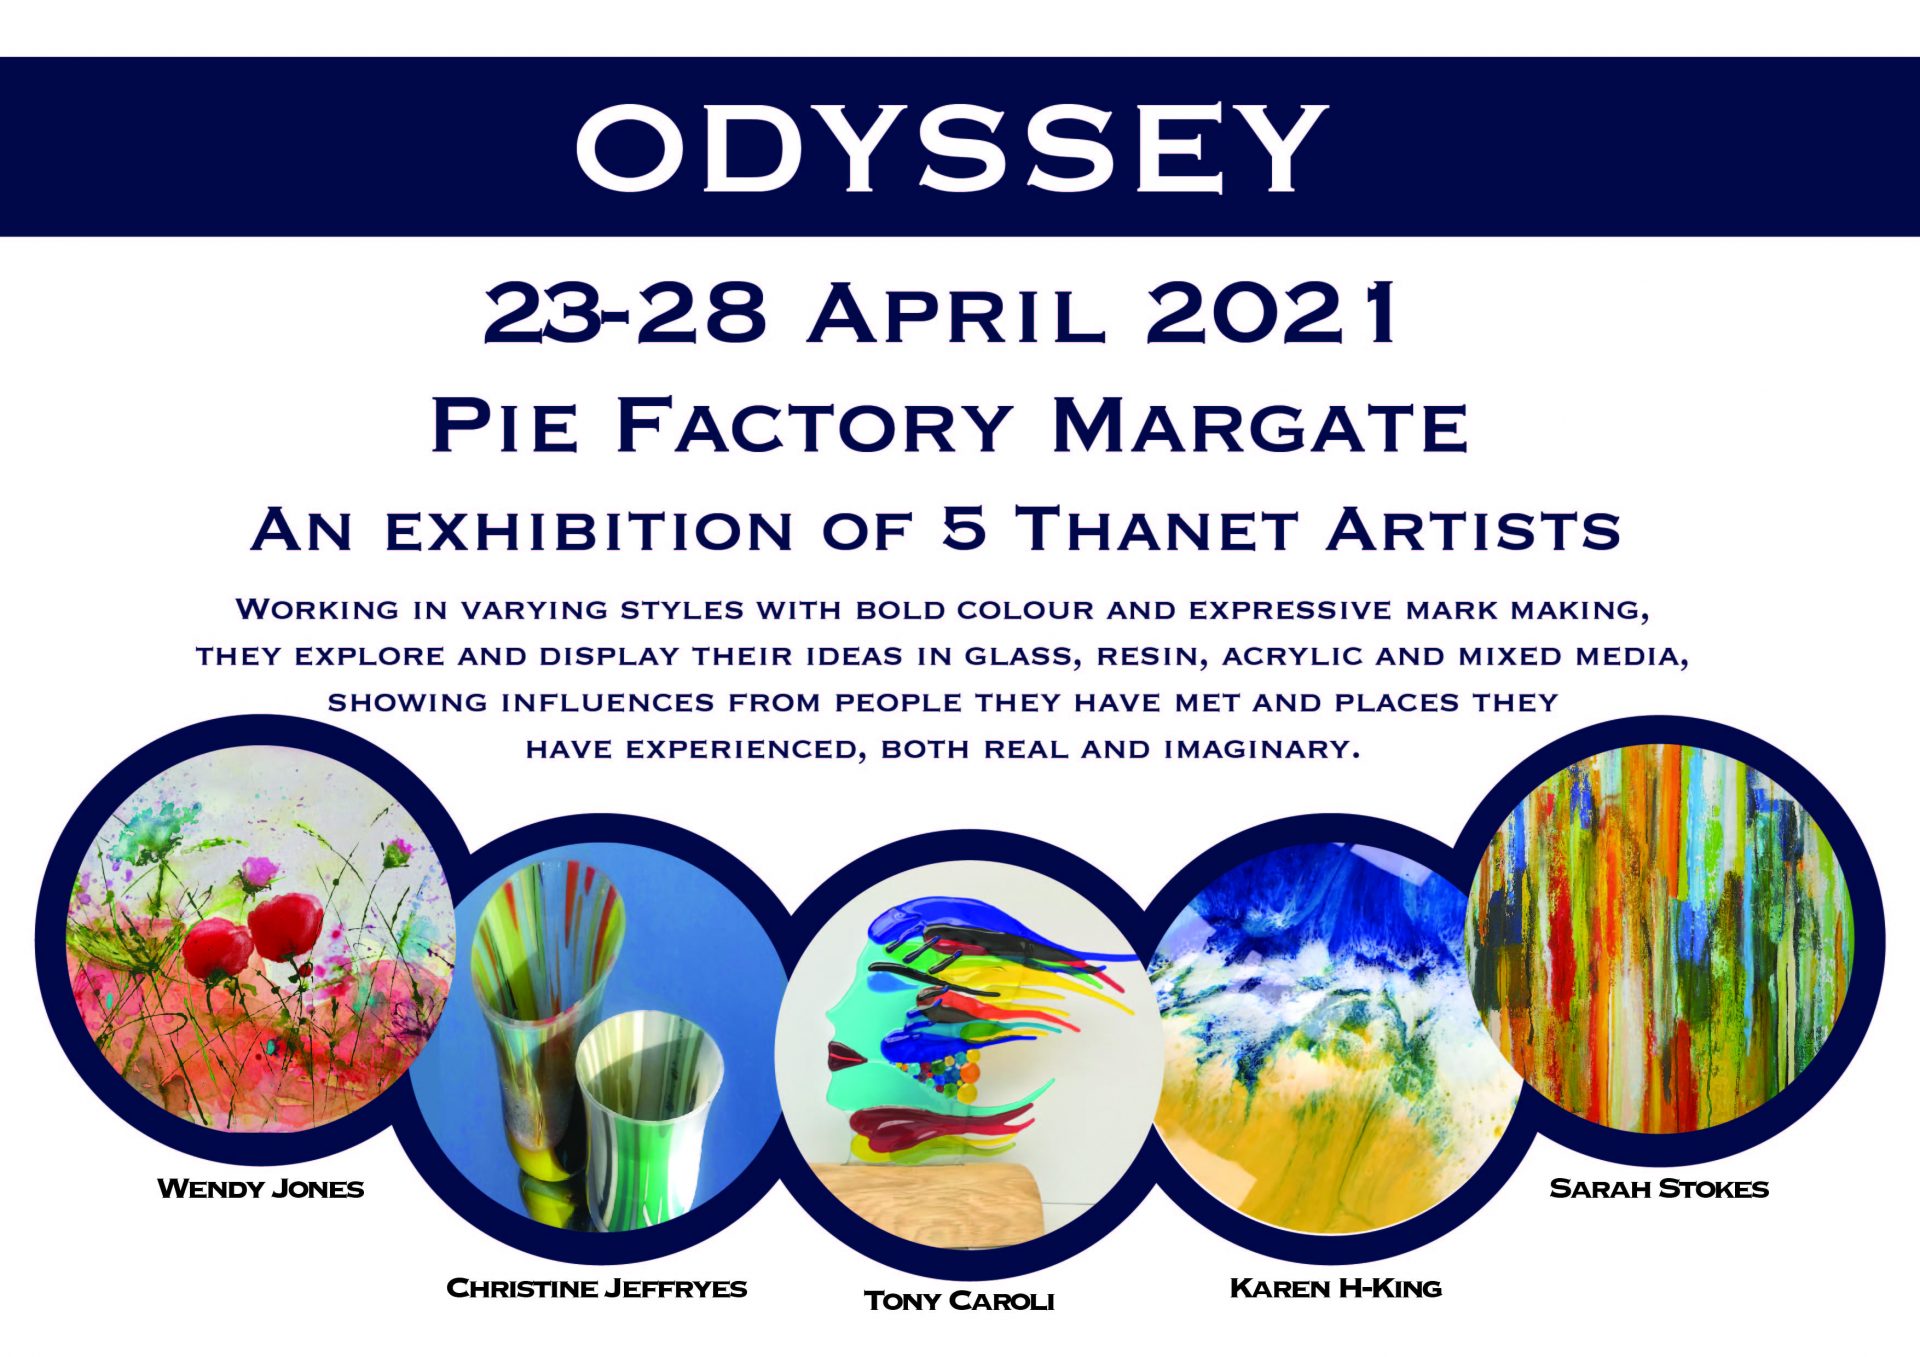 Odyssey Exhibition at Pie Factory Margate